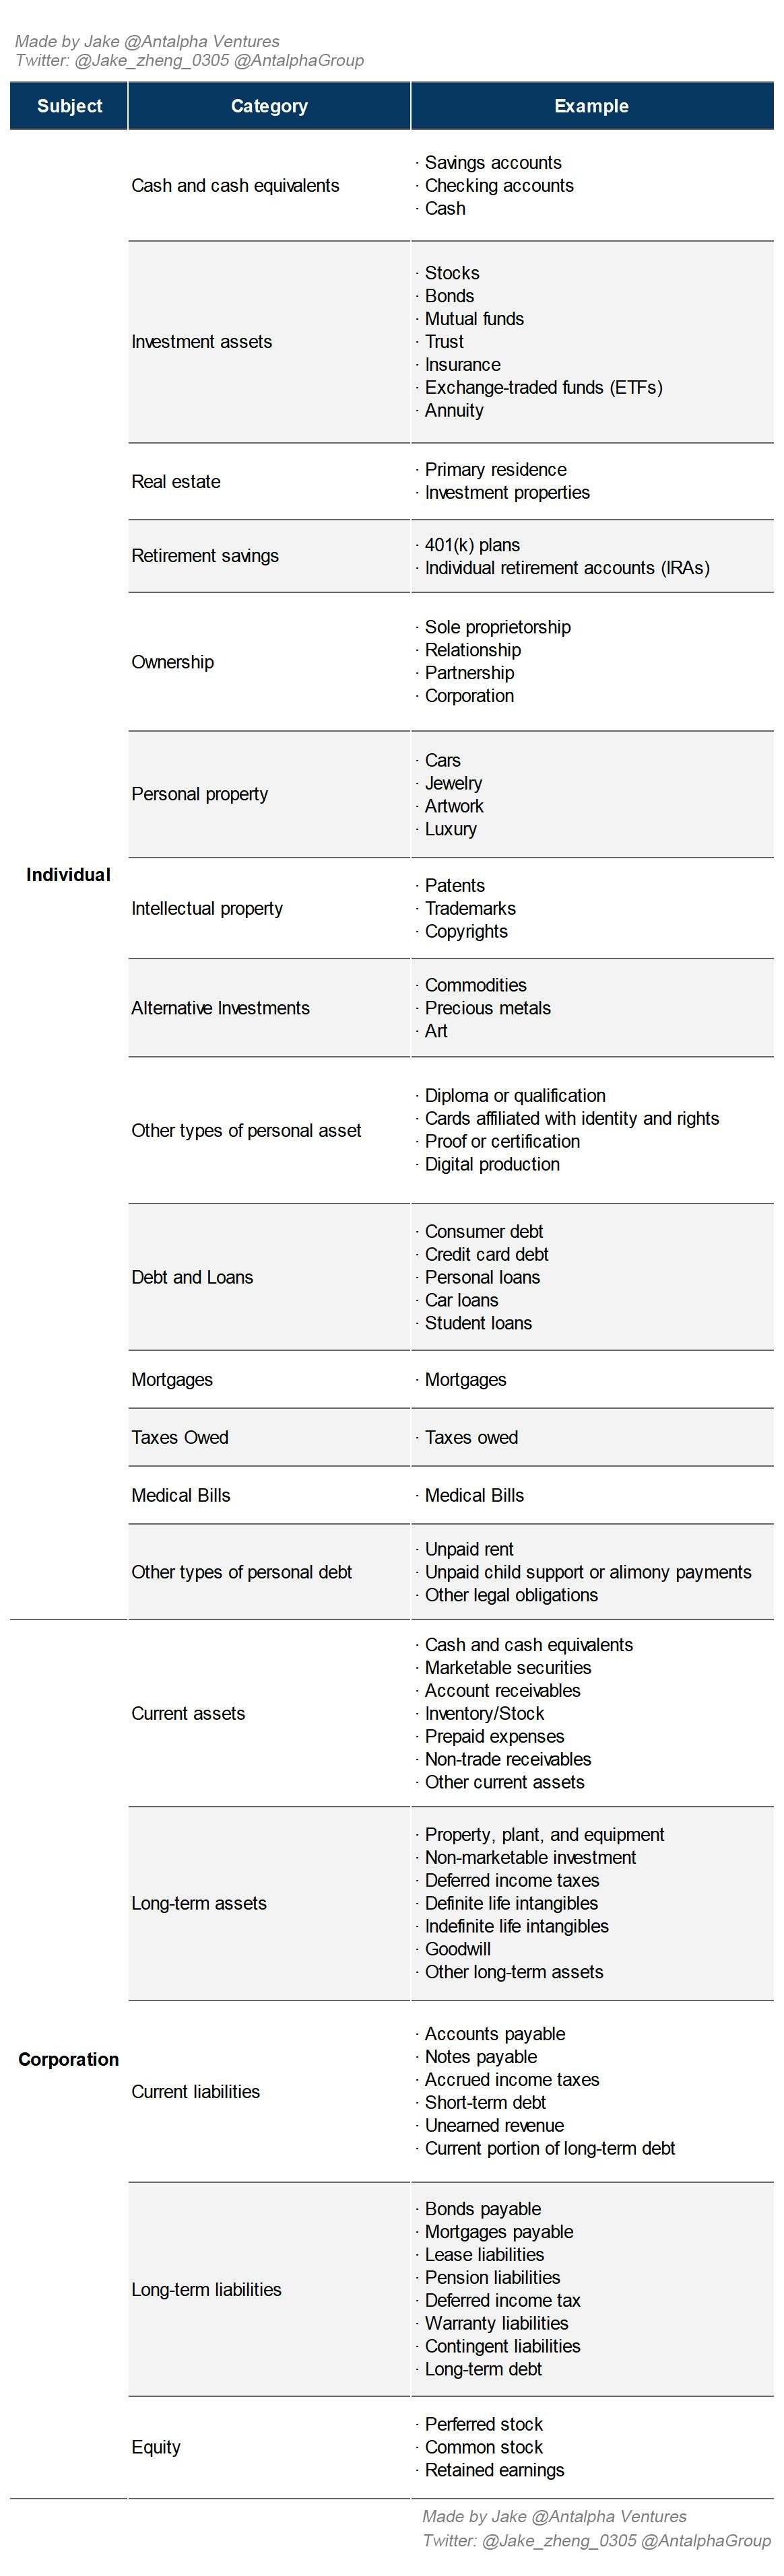 The categories of assets